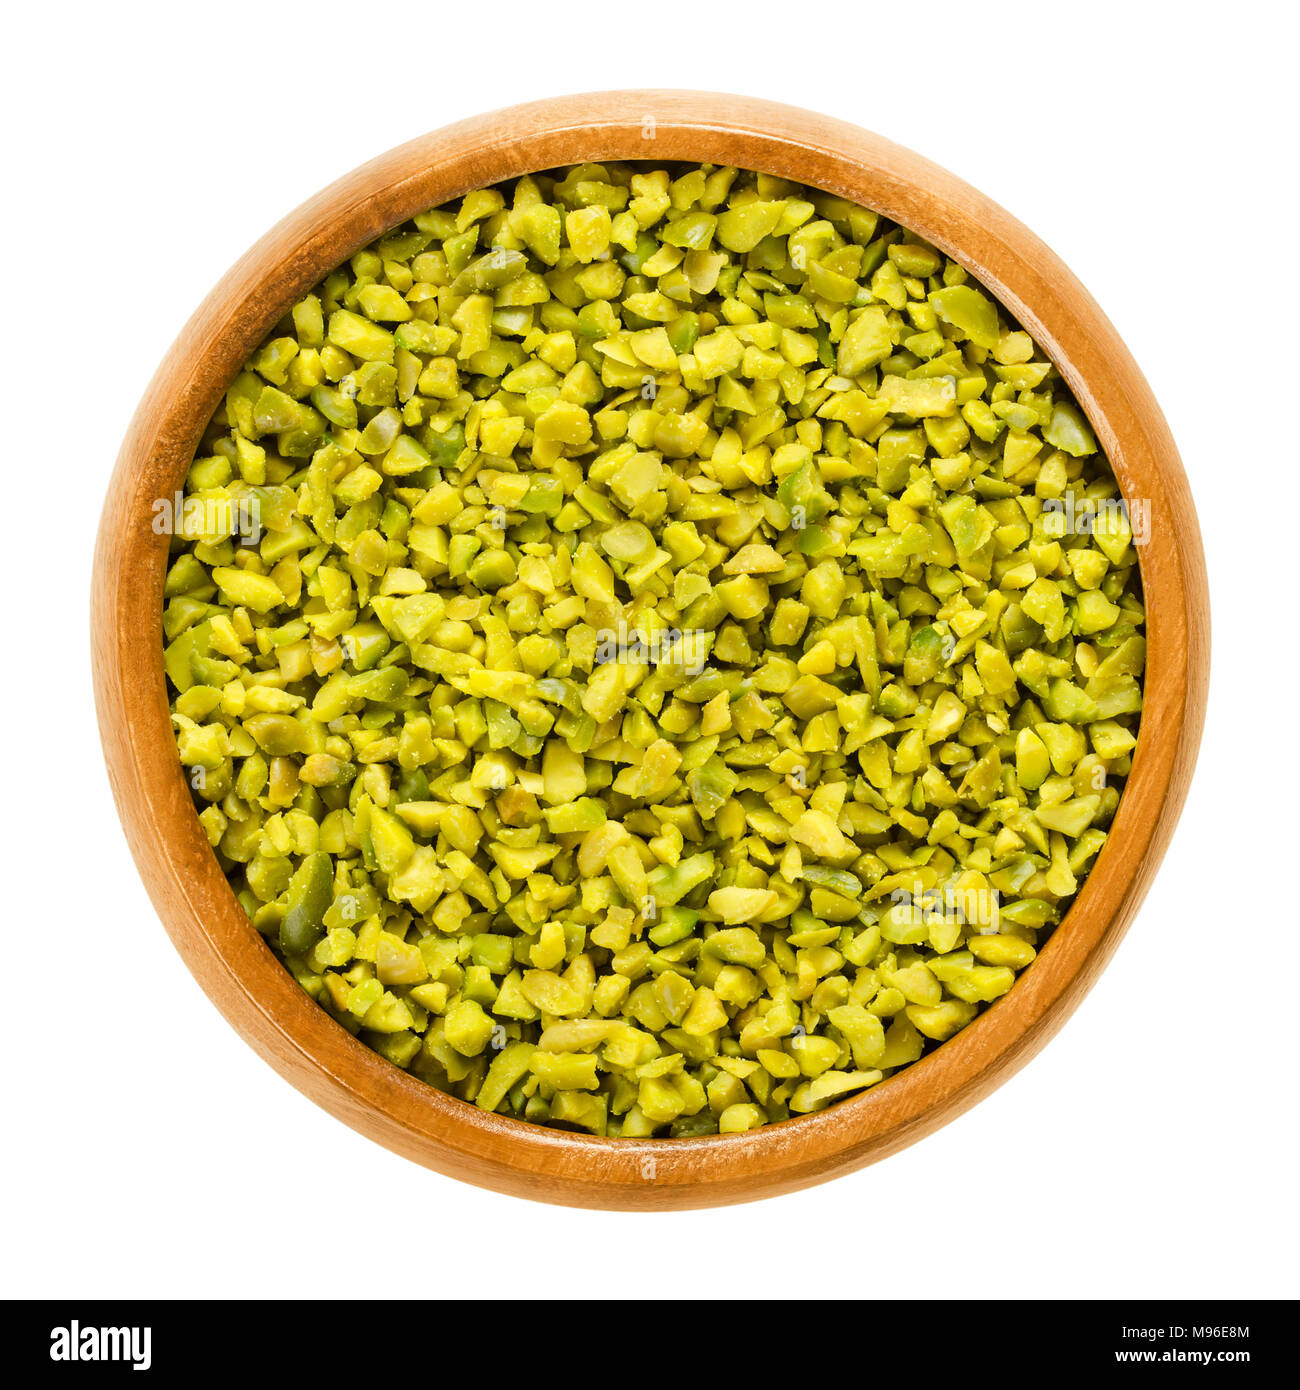 Chopped green pistachios in wooden bowl. Dried and peeled kernels. Shelled fruits and seeds of Pistacia vera. Used as snack or for desserts. Stock Photo